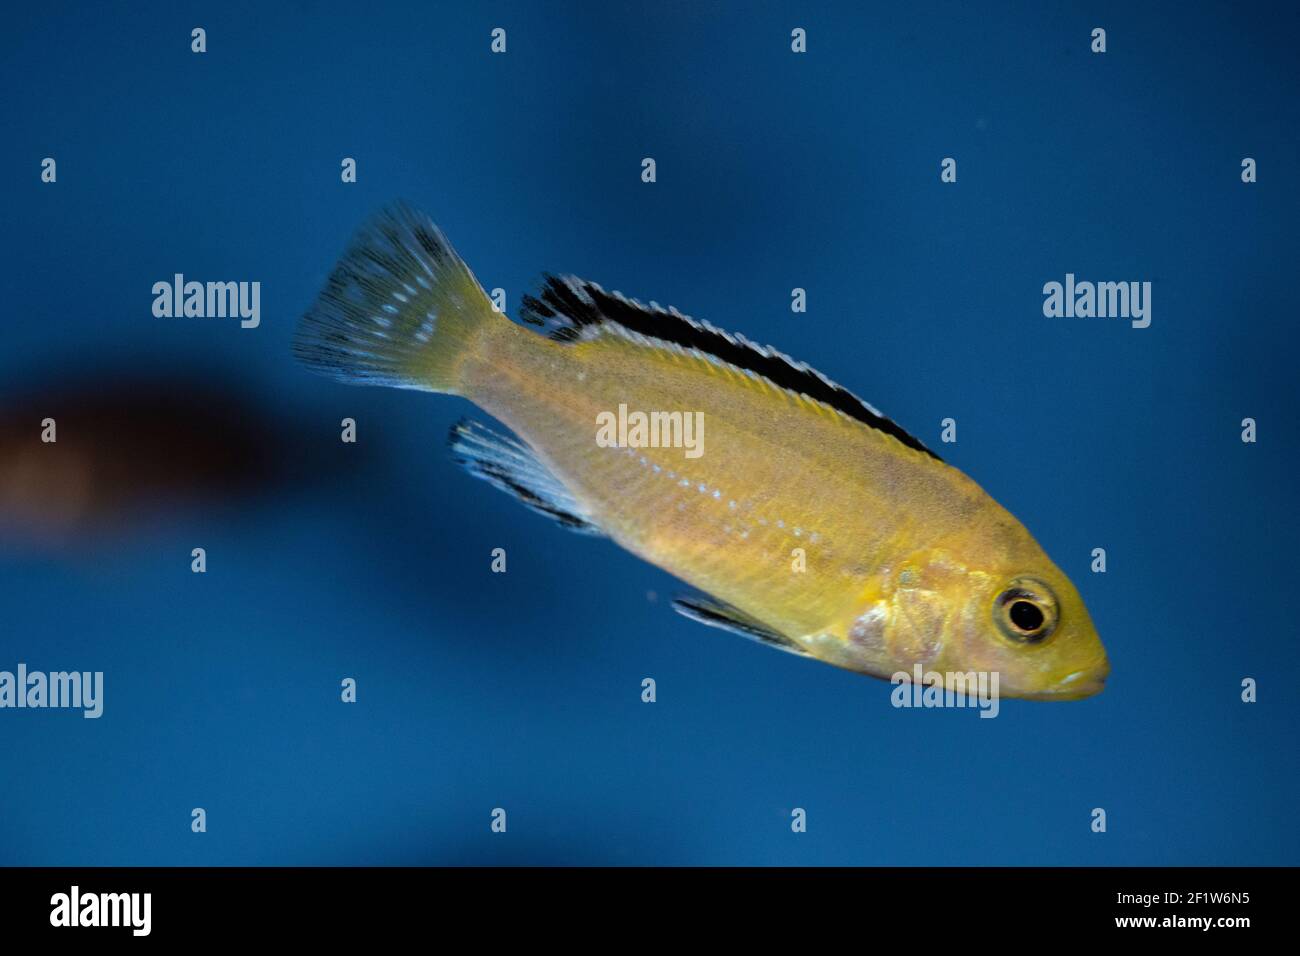 Labidochromis caeruleus is a cichlid from Lake Malawi in East Africa.   It is also known as lemon yellow lab, the blue streak hap, the electric yellow Stock Photo